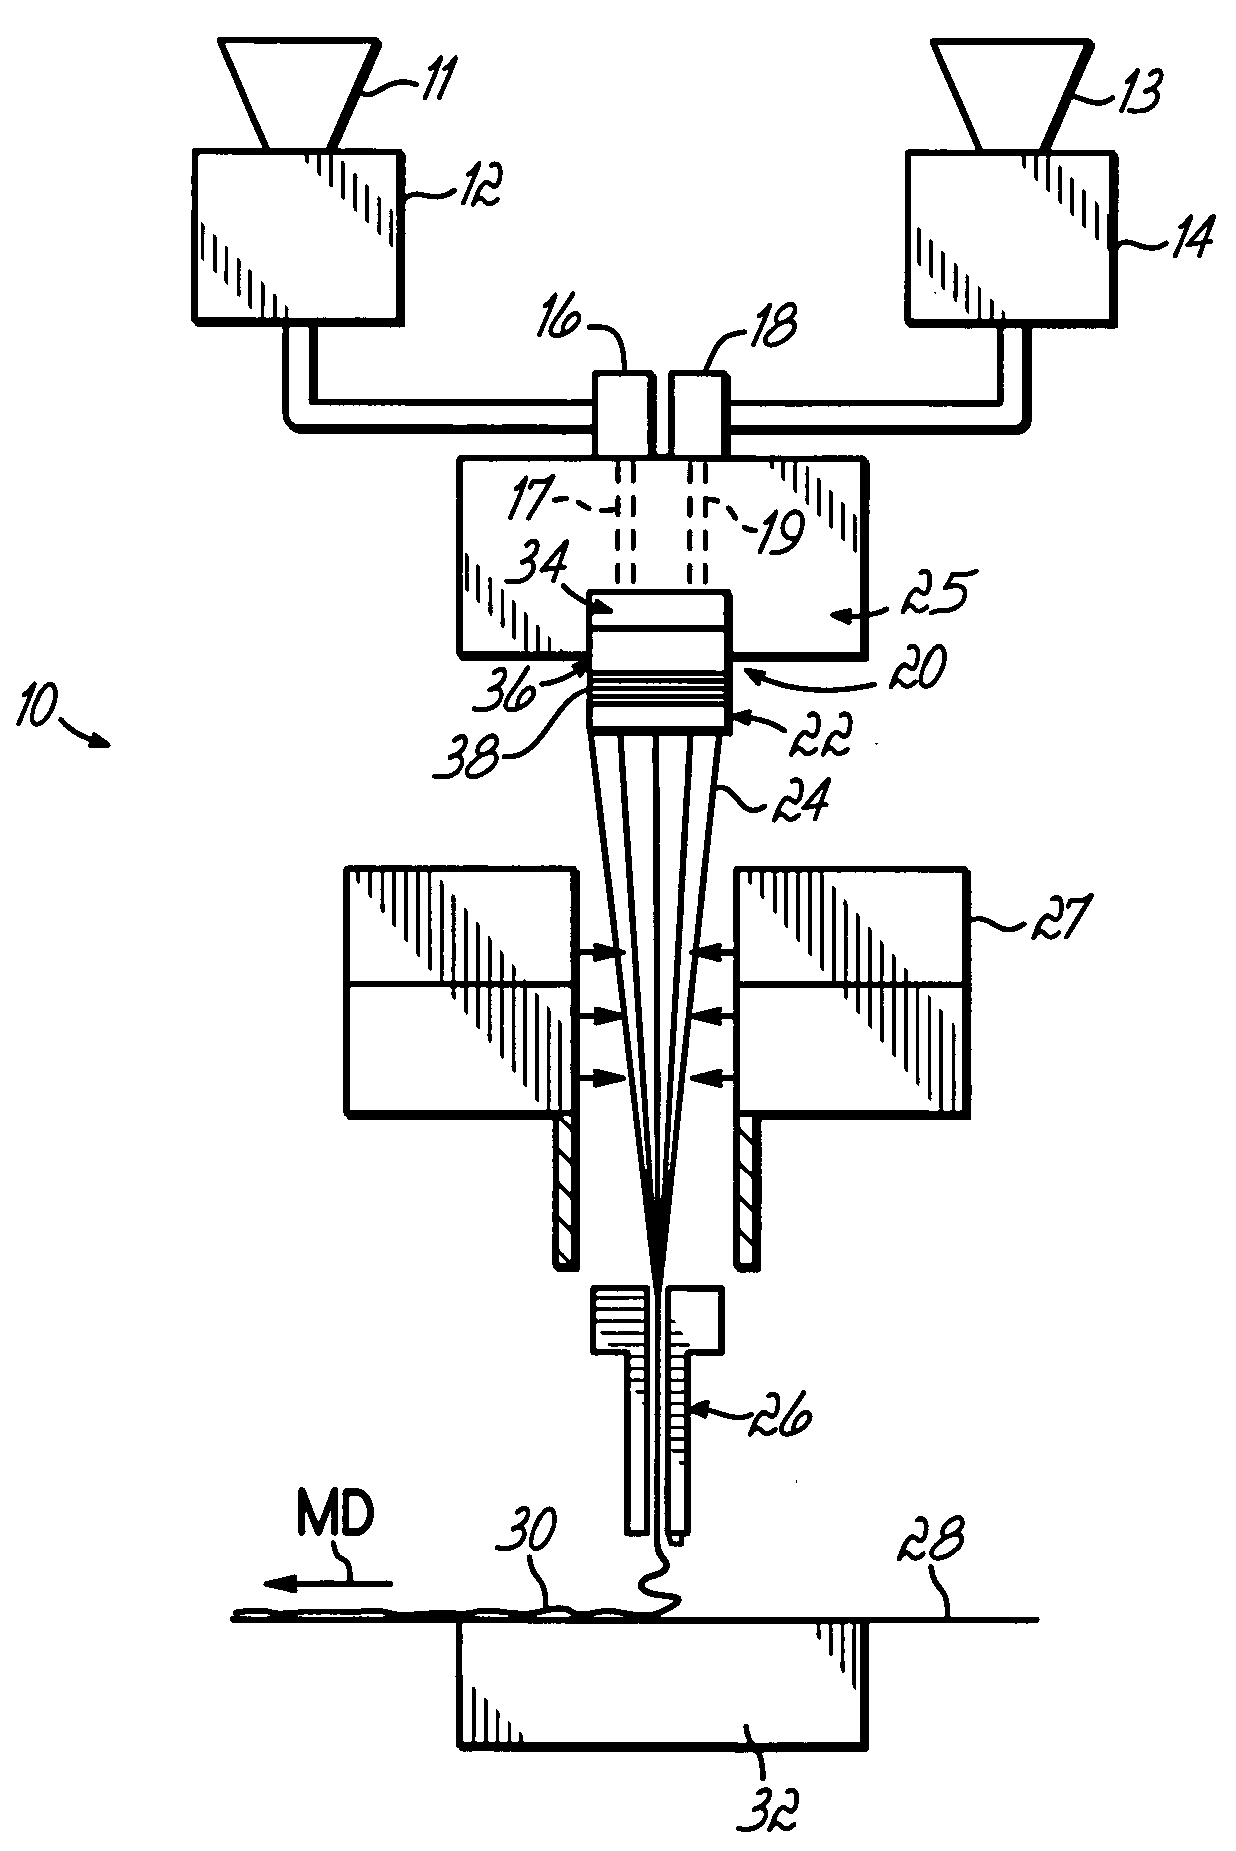 Spundbonding spin pack characterized by uniform polymer distribution and method of use